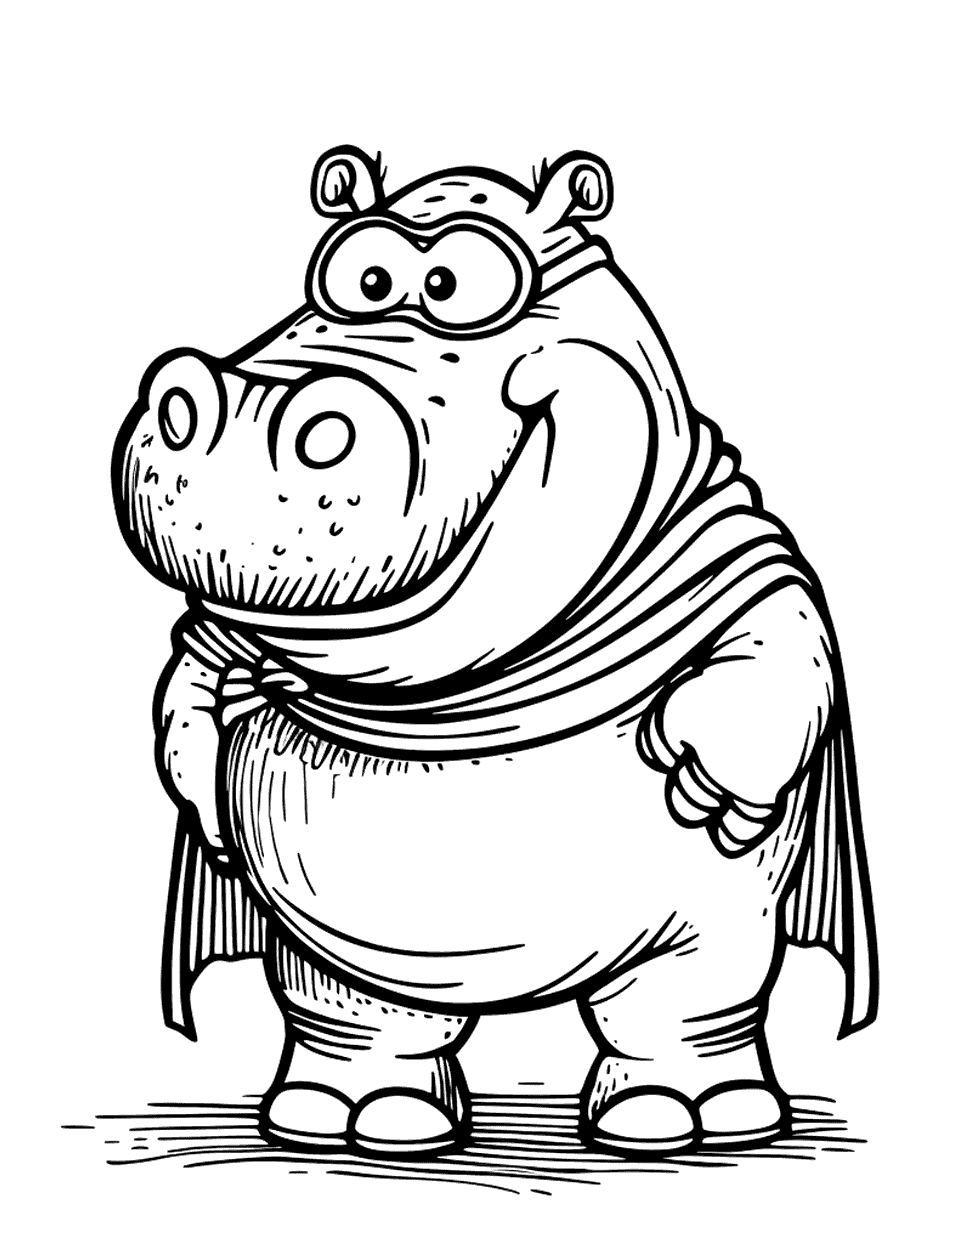 Hippo Superhero Coloring Page - A superhero hippo wearing a cape and mask, ready to save the day.